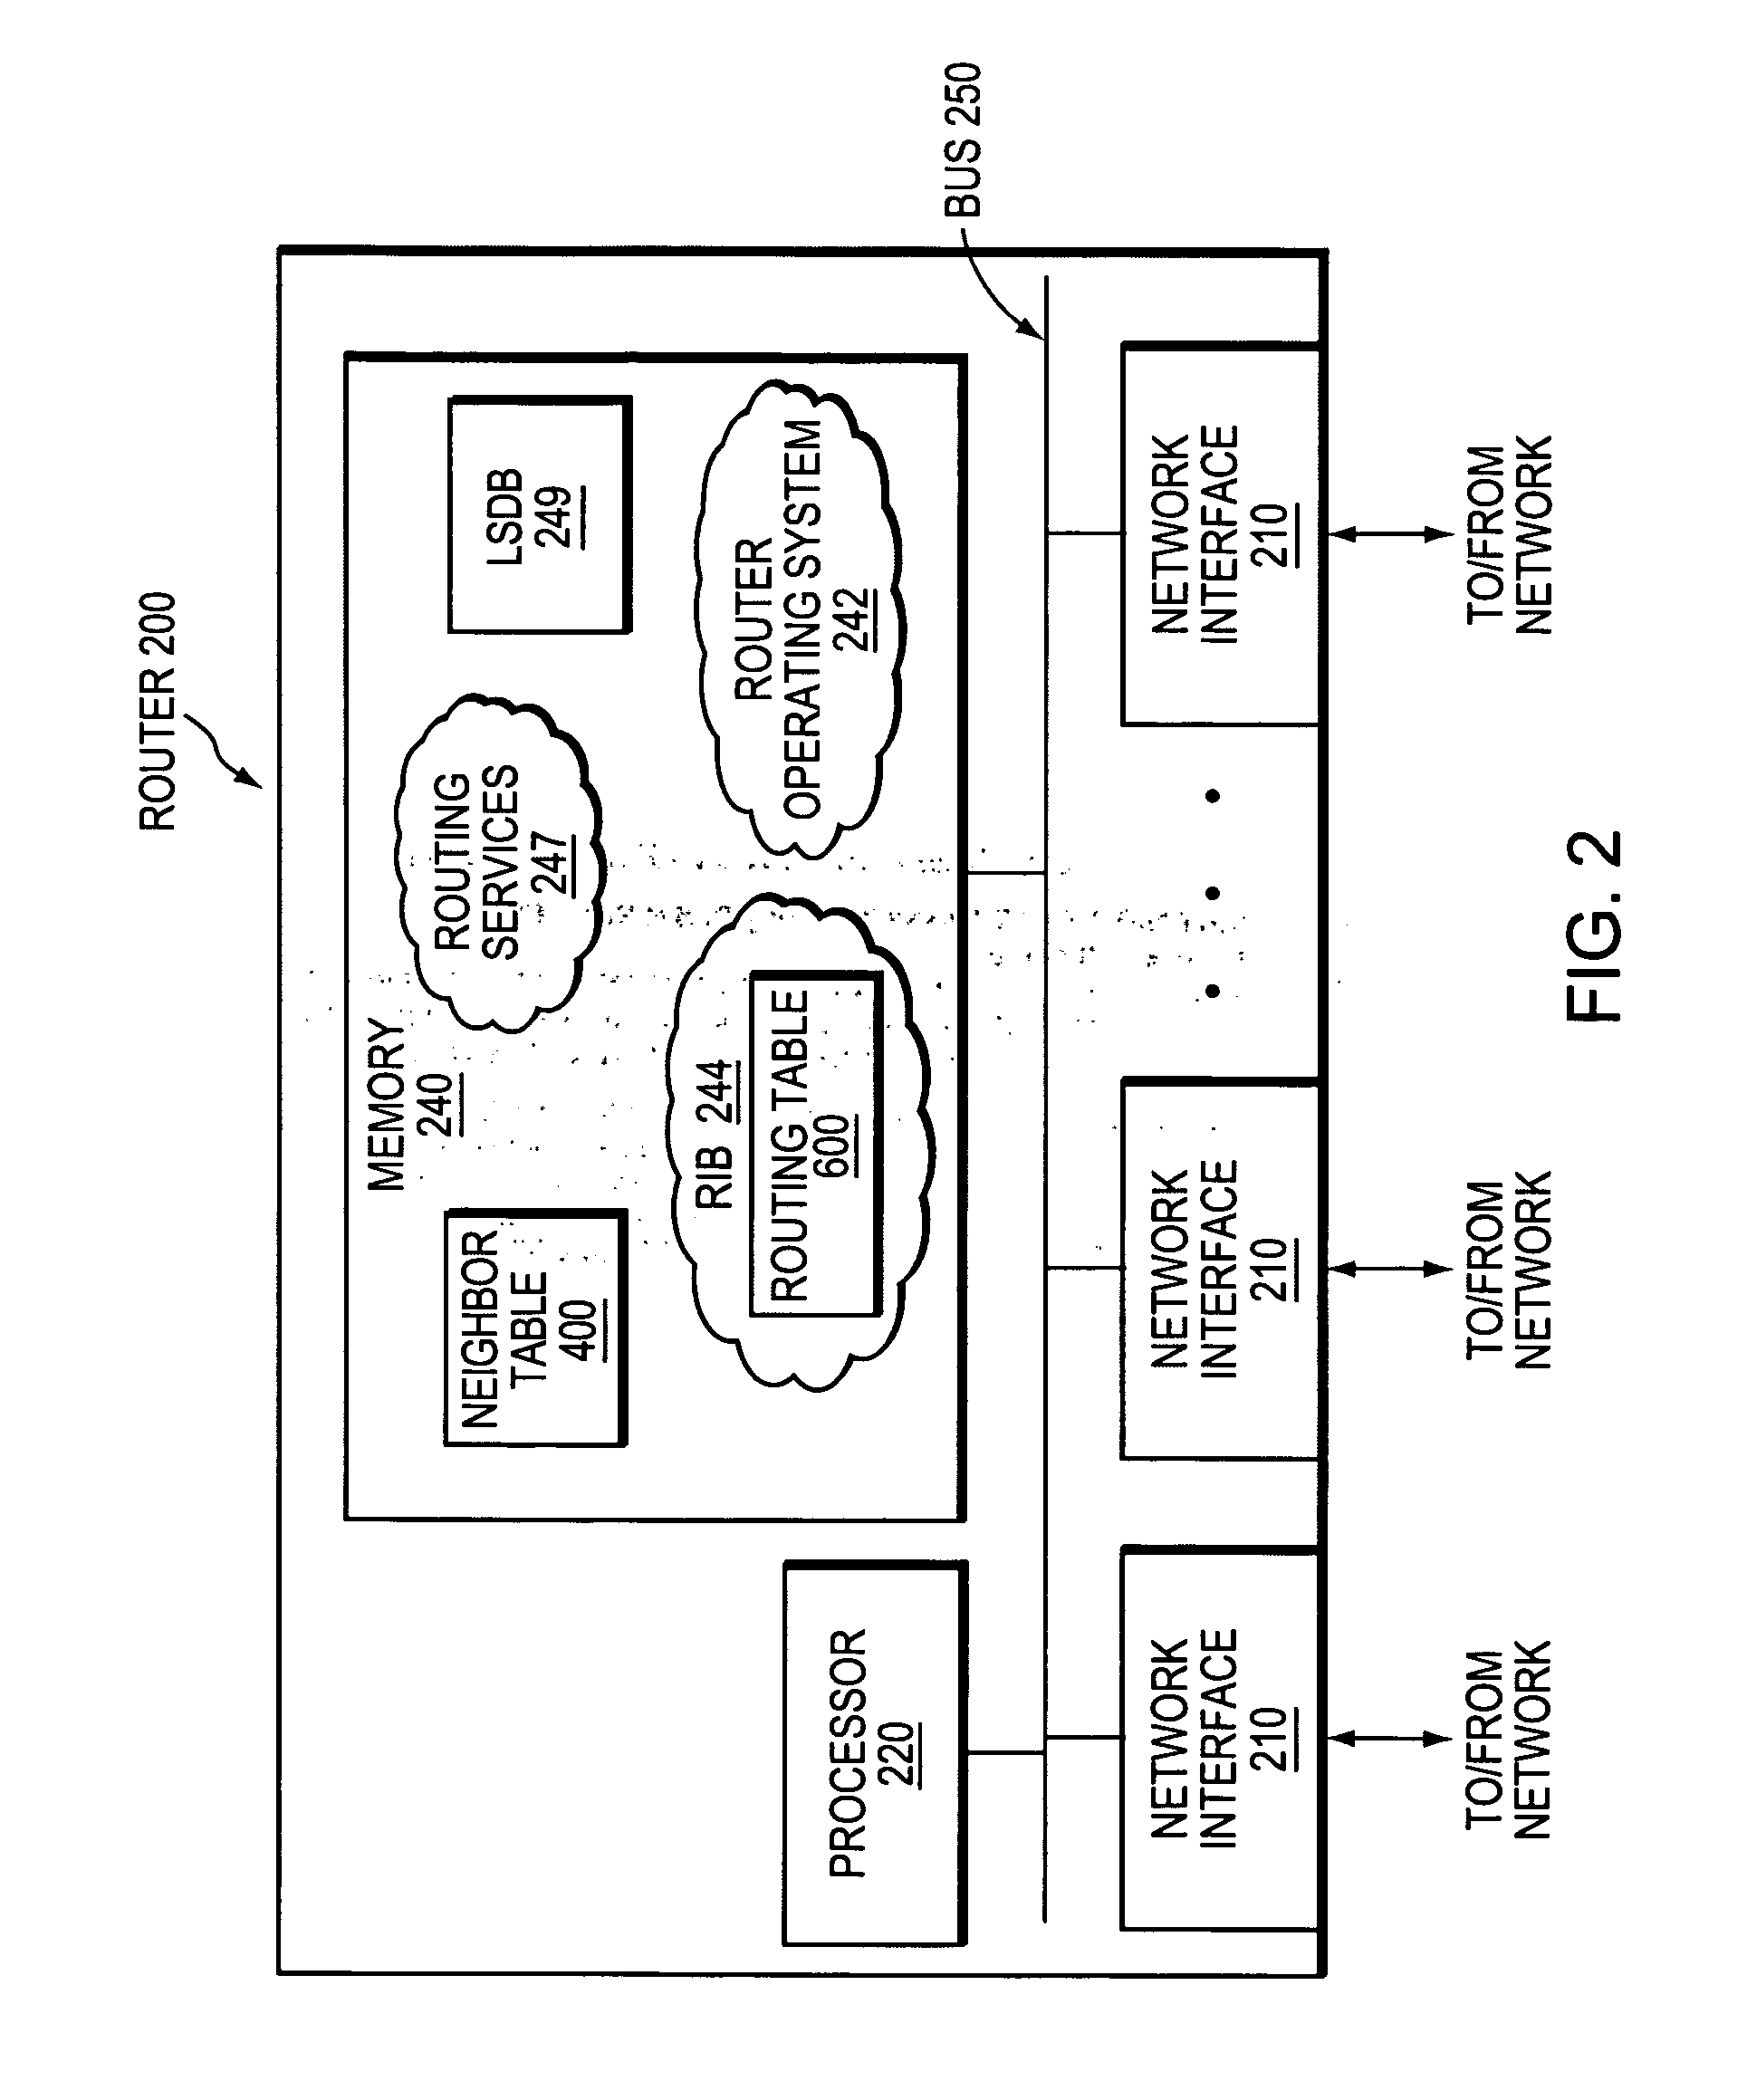 Dynamically configuring and verifying routing information of broadcast networks using link state protocols in a computer network